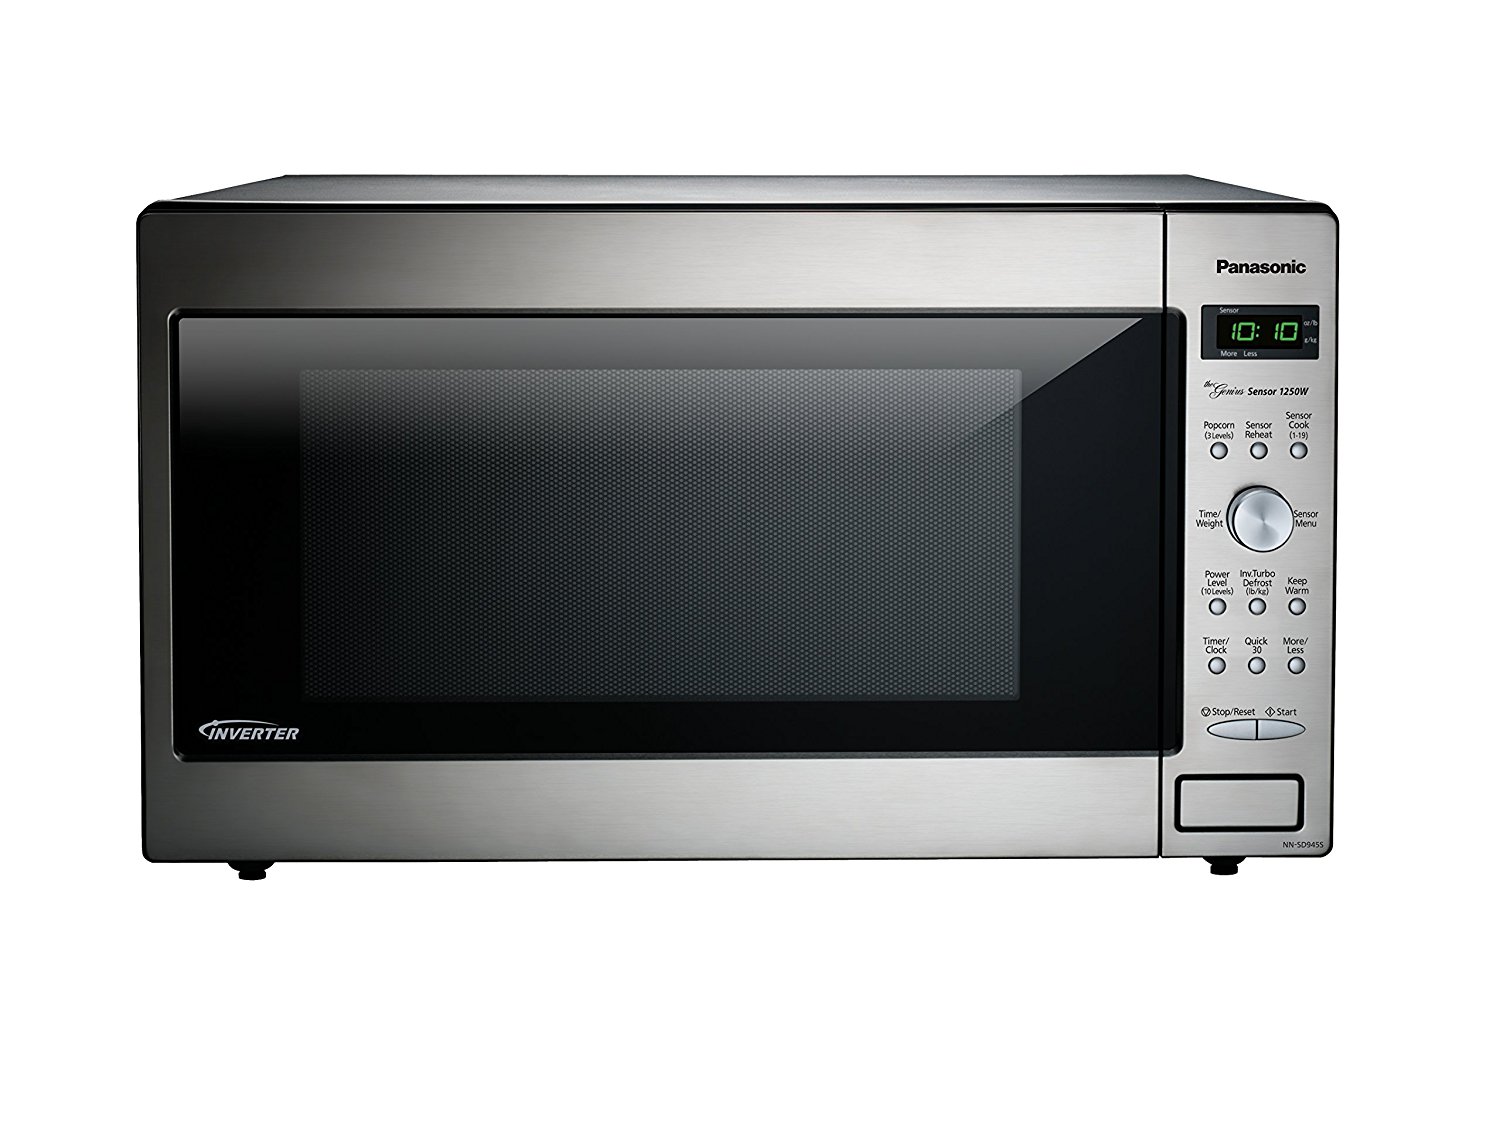 Panasonic NN-SD945S Countertop/Built-In Microwave with Inverter Technology, 2.2 cu. ft. , Stainless